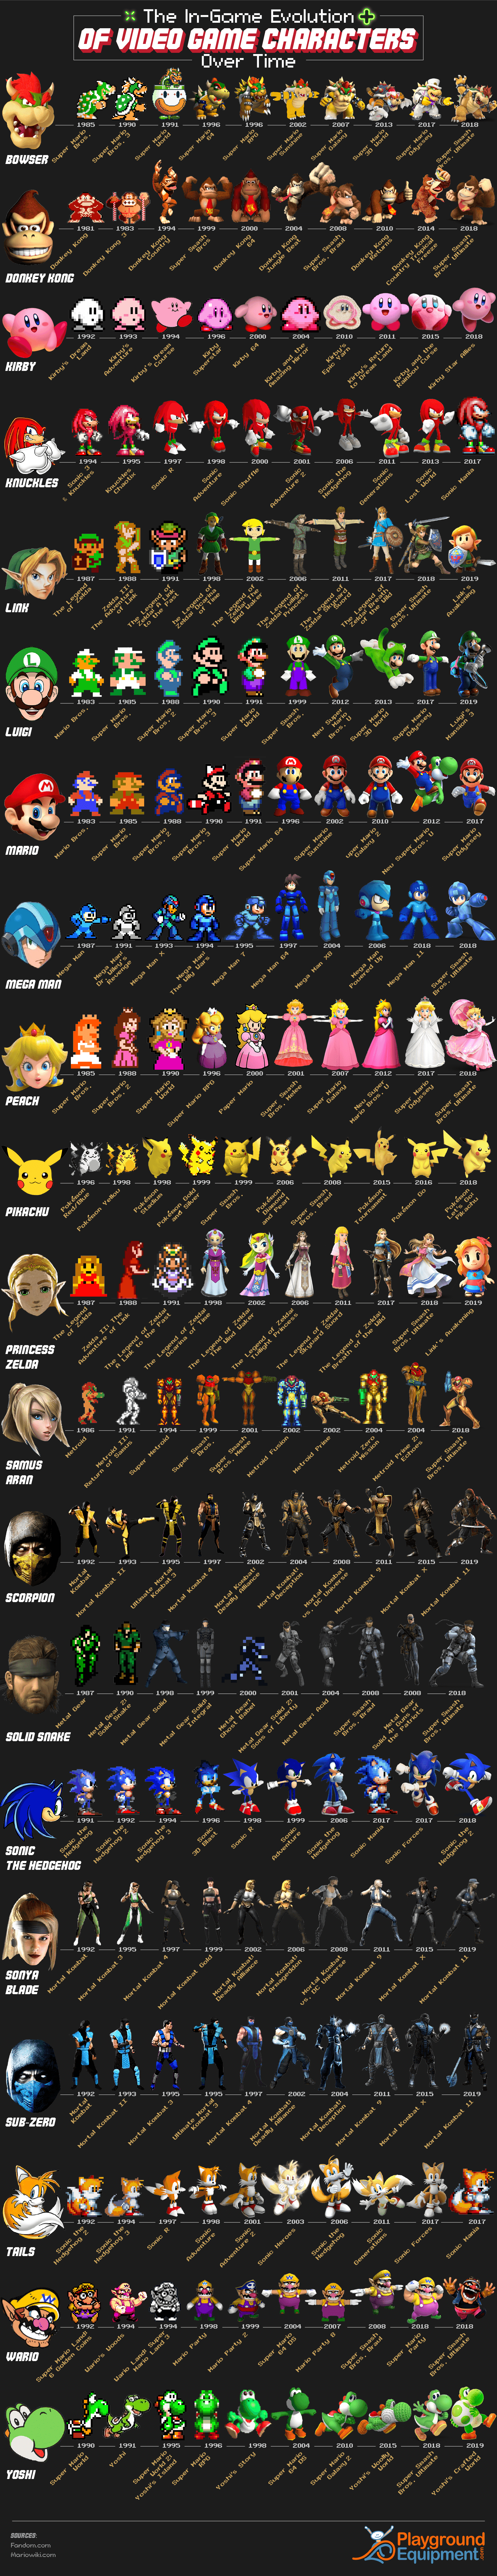 The evolution of video game characters through the ages. 